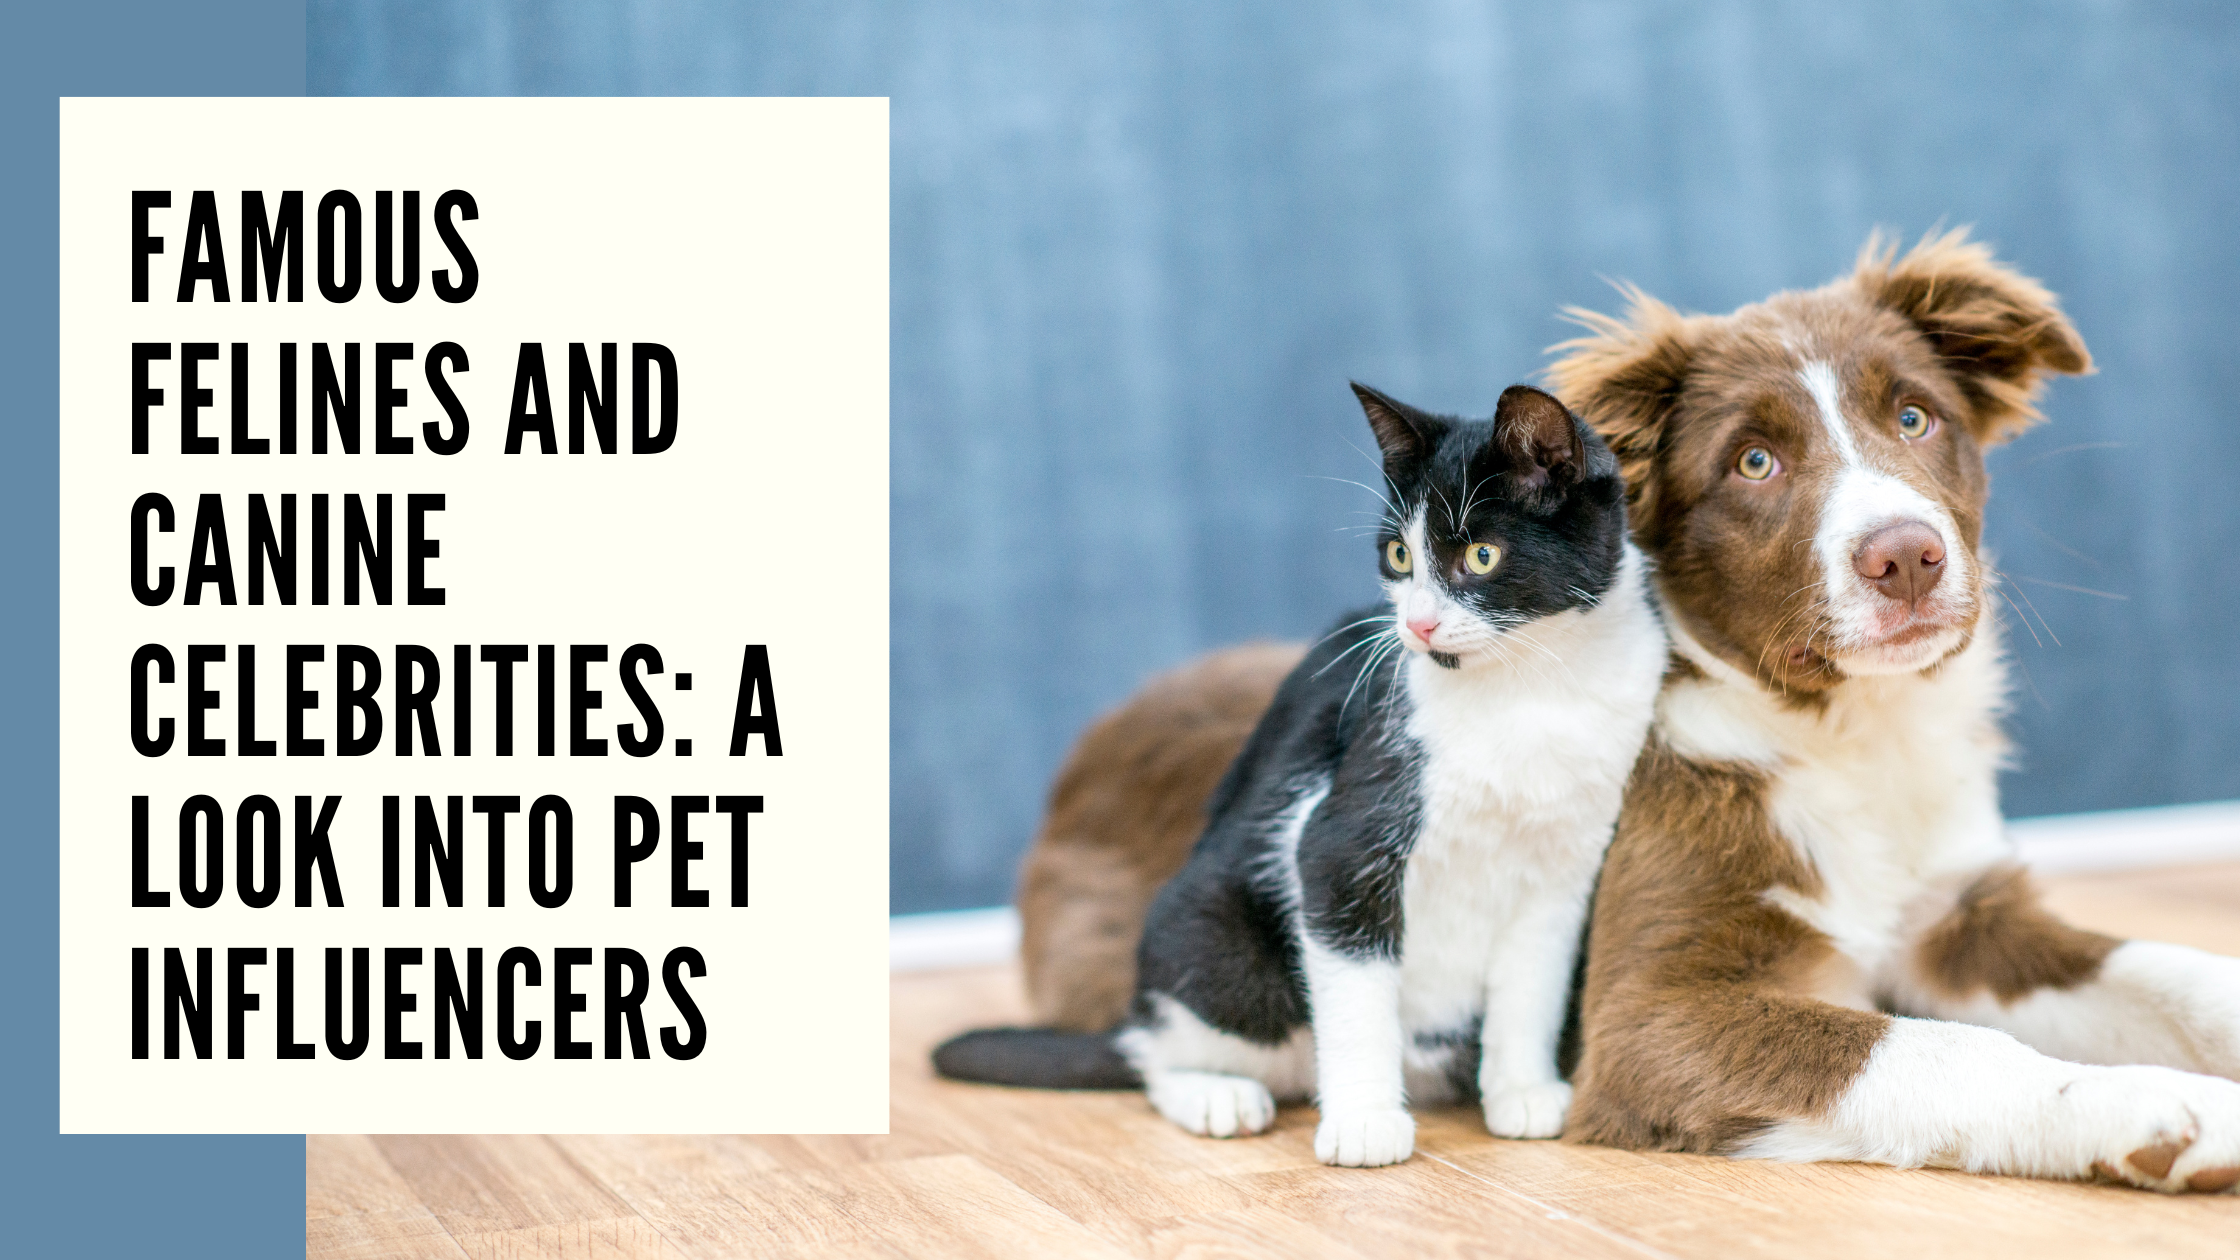 Famous Felines and Canine Celebrities A Look into Pet Influencers